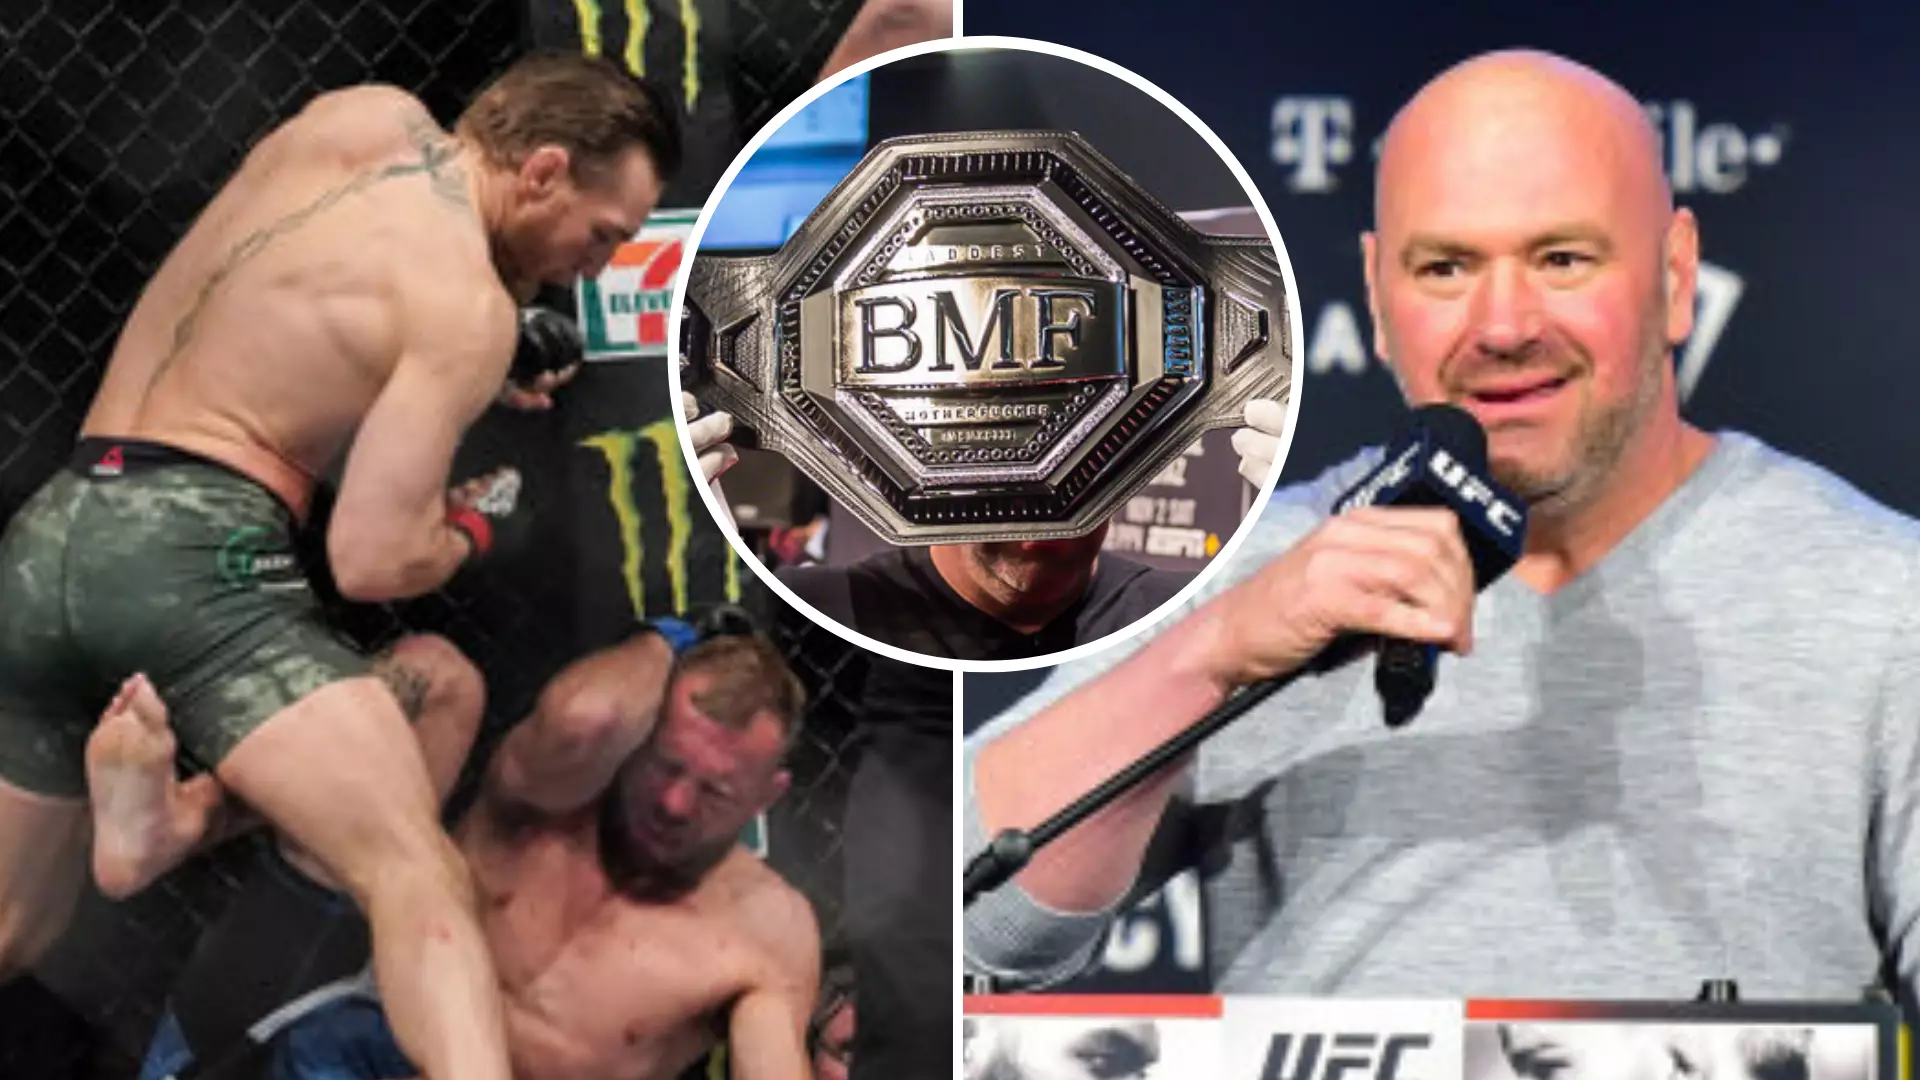 Dana White’s 2009 Prediction For Where UFC Would Be At In 2020 Fell Well Short Of The Mark